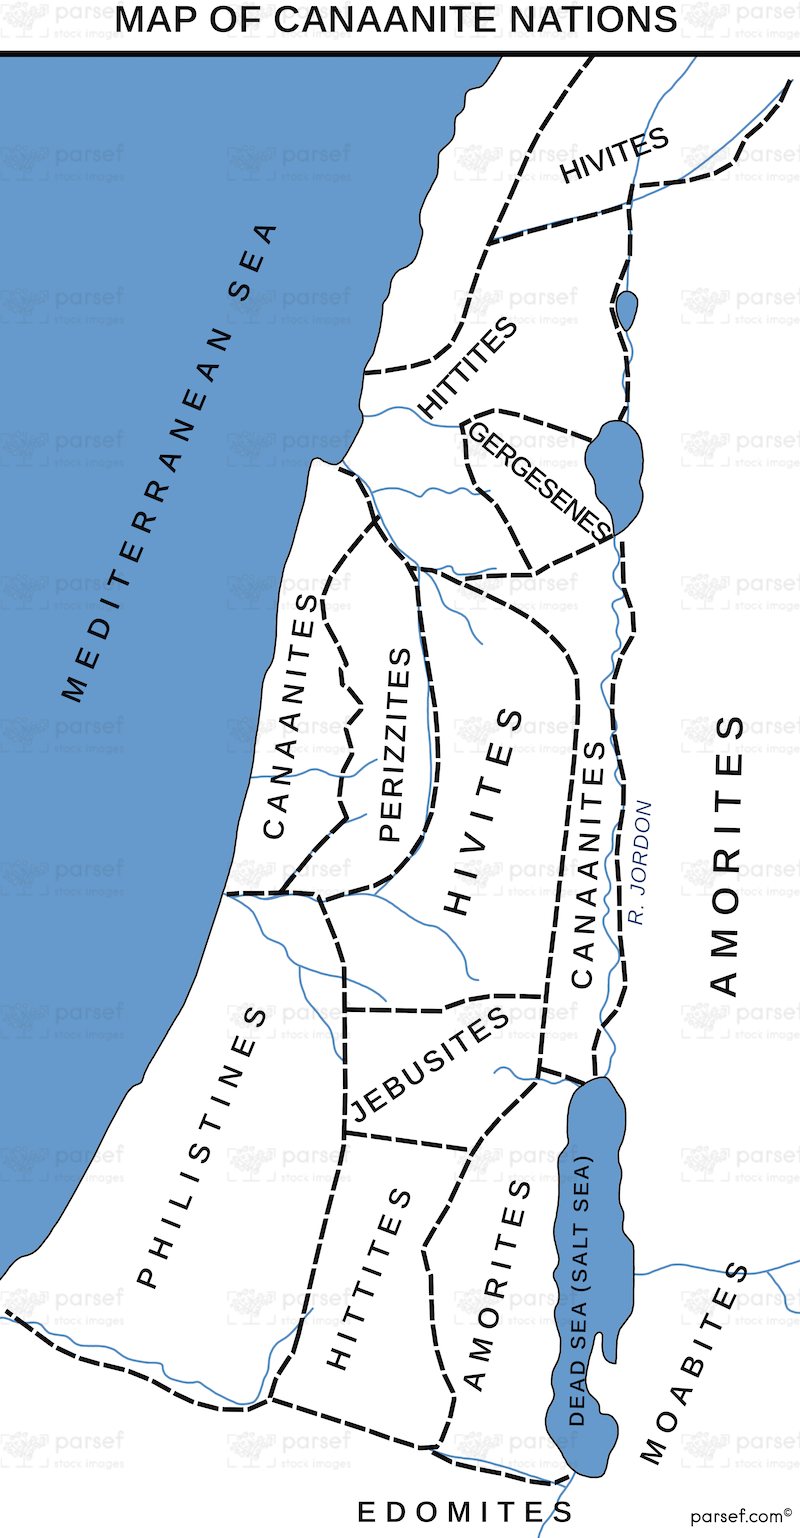 Canaanite Nations Map image